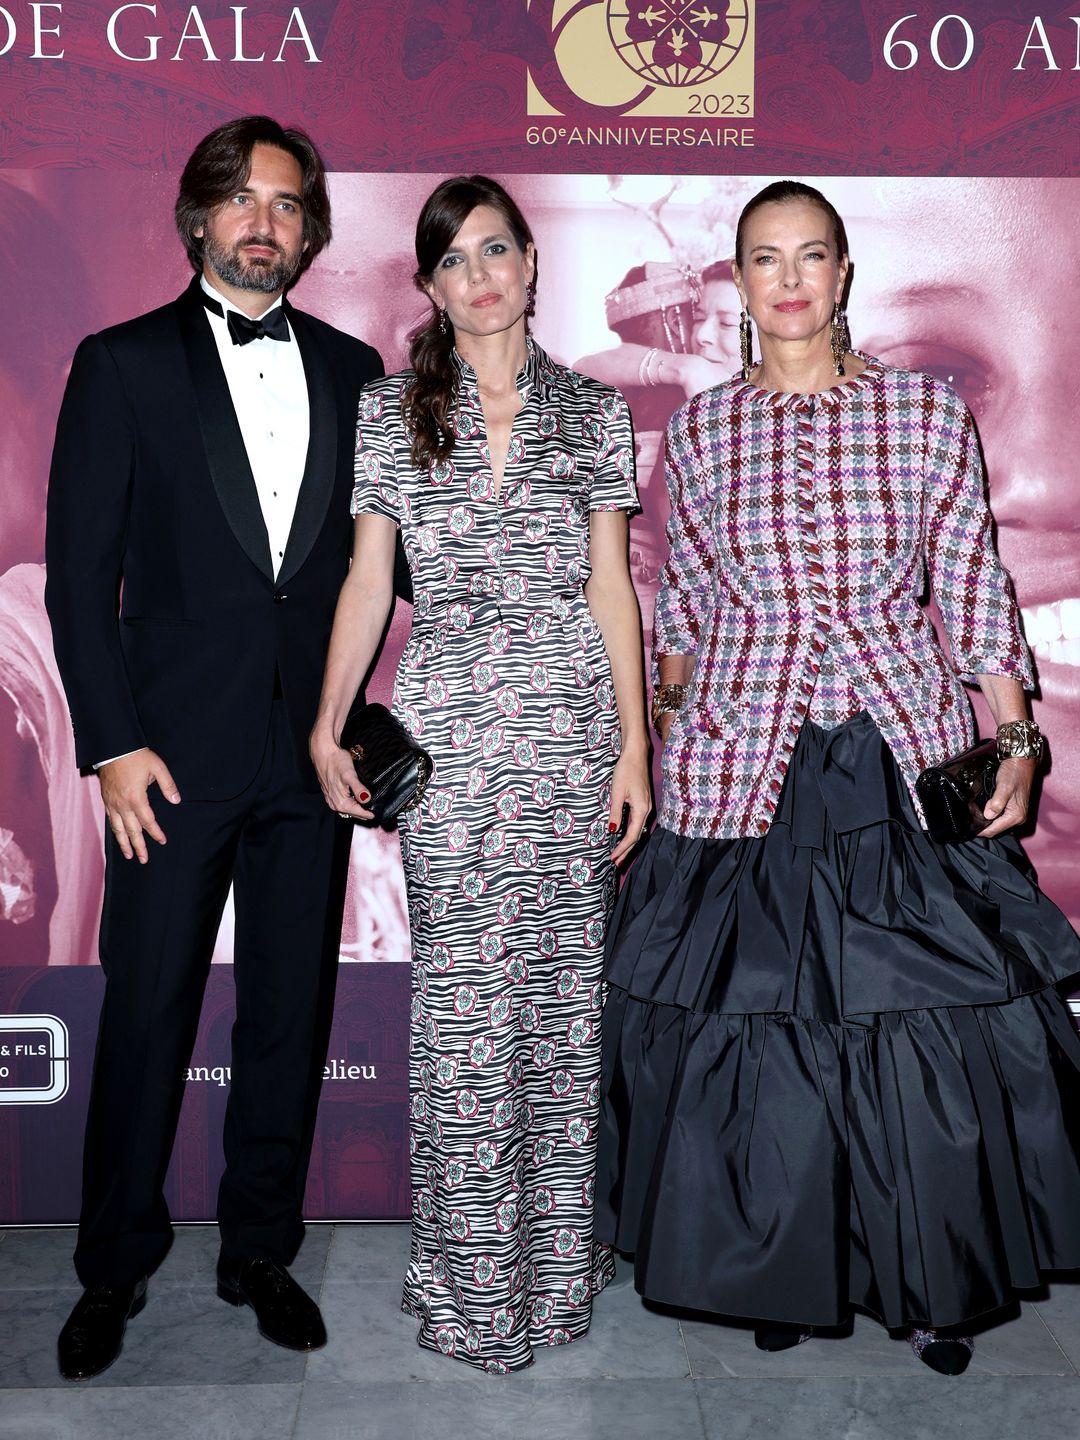 Dimitri Rassam, Charlotte Casiraghi and Carole Bouquet attended the 60th AMADE Anniversary Dinner in Monte Carlo